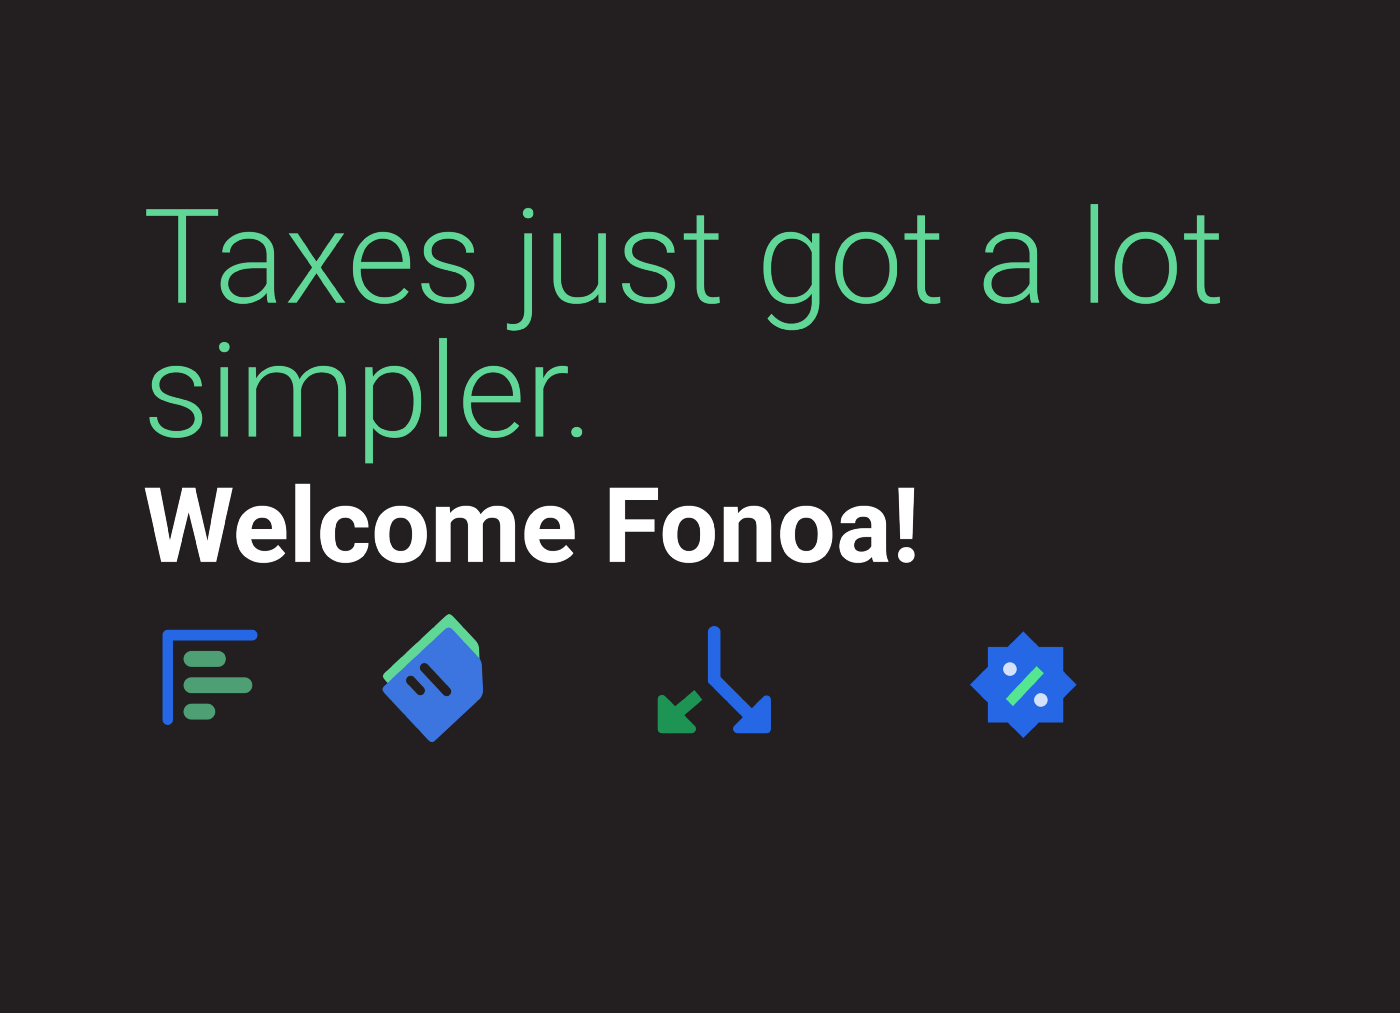 Taxes for Internet businesses just got simpler